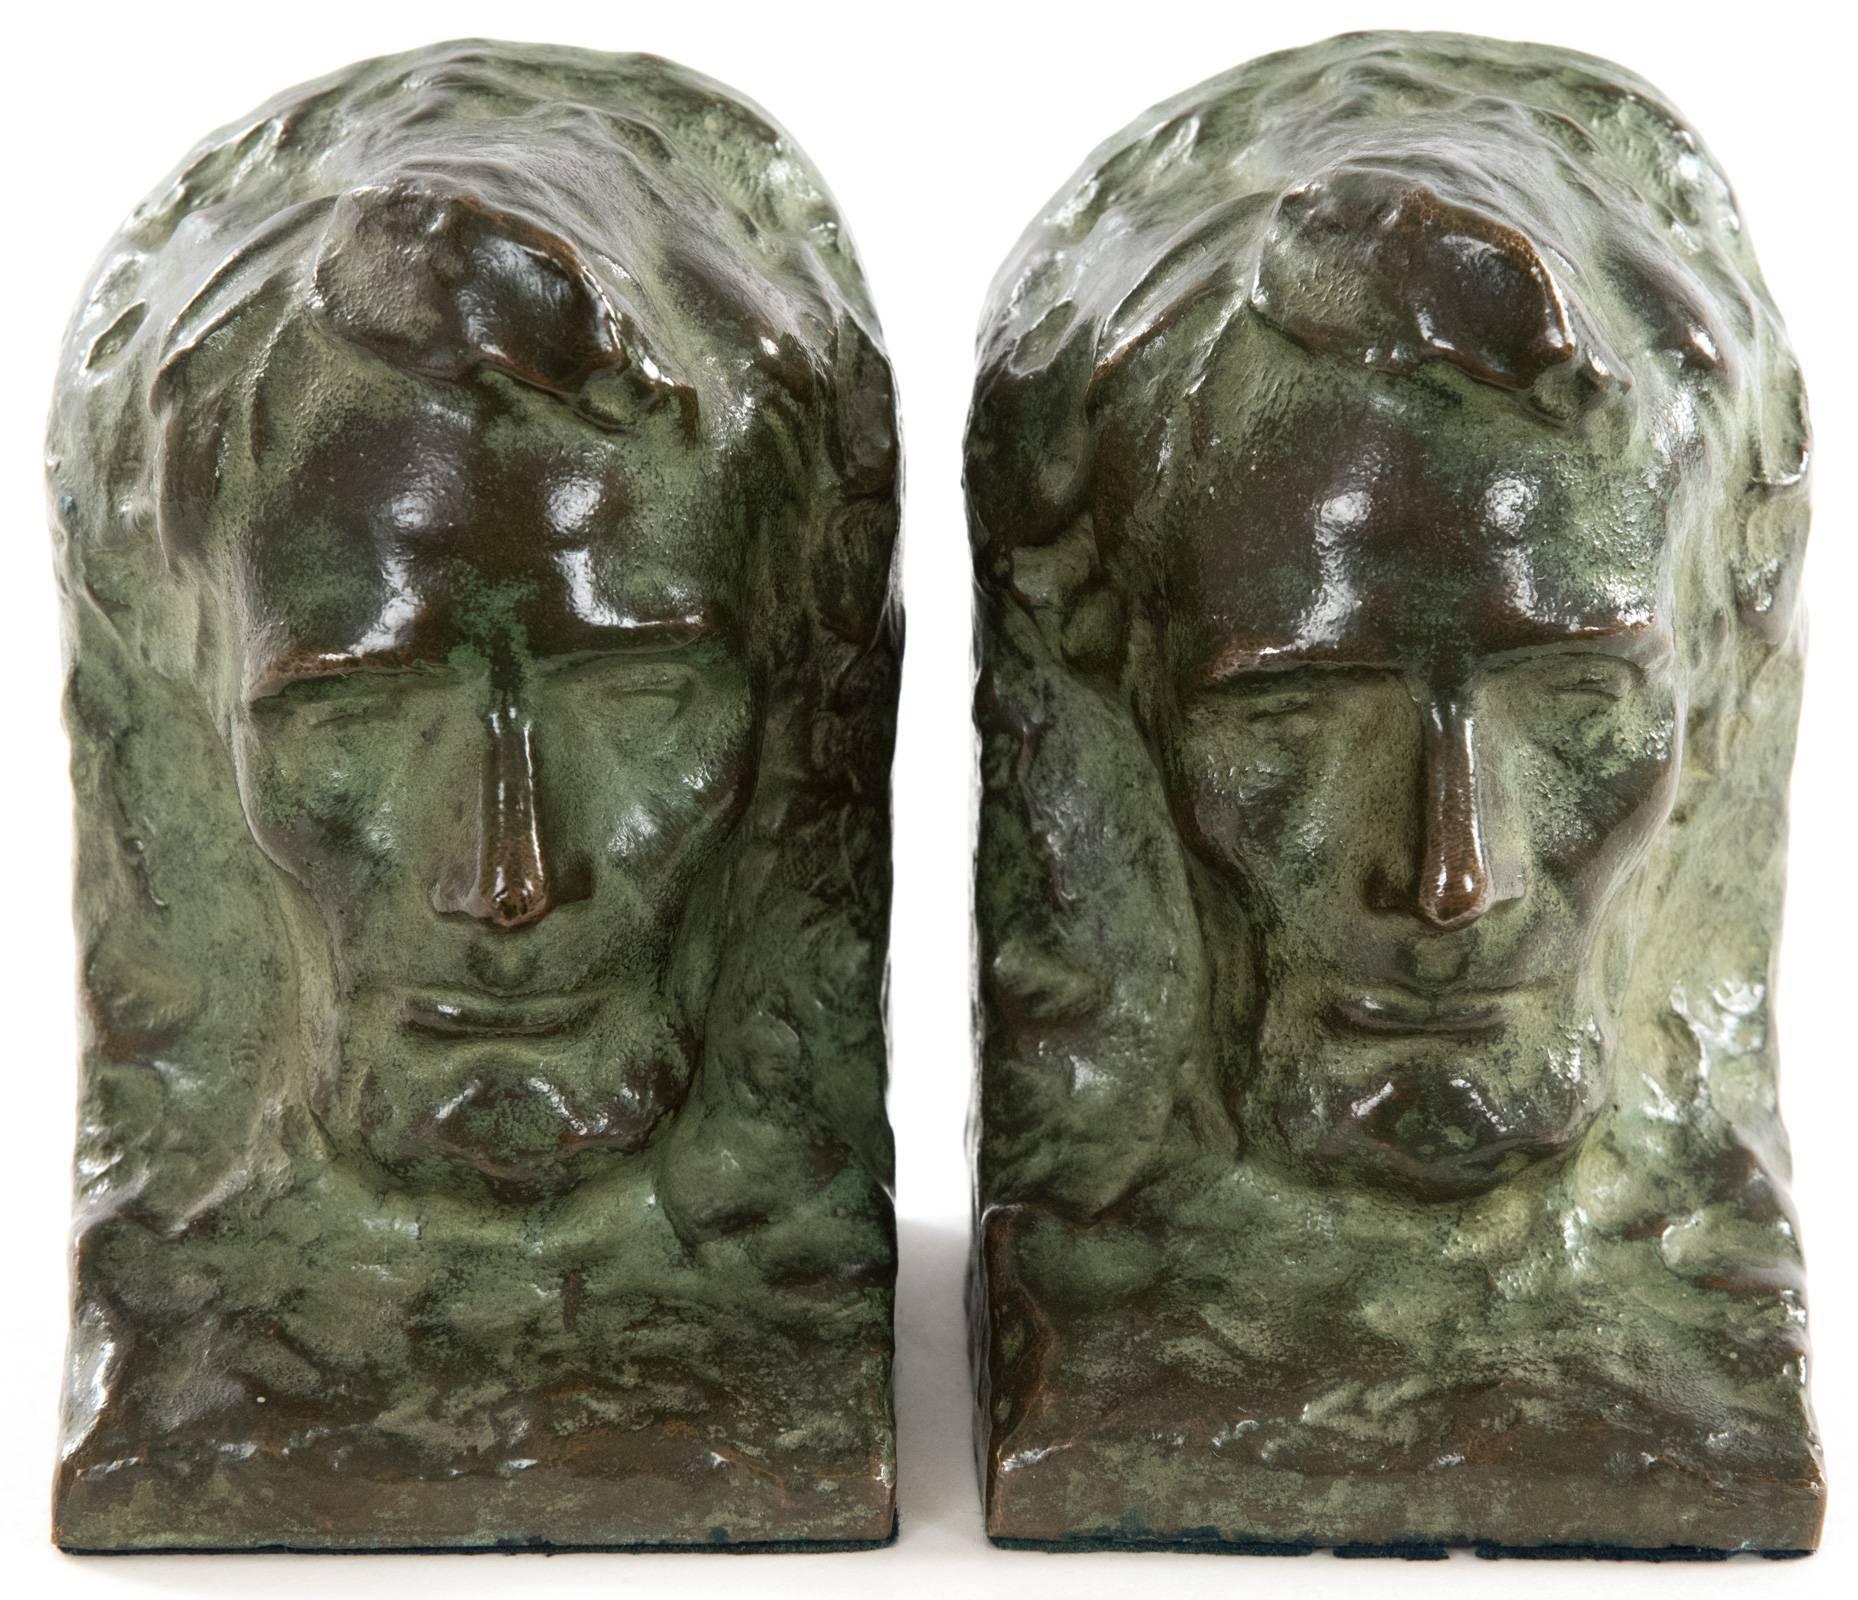 A pair of cast bronze bookends depicting the head of Abraham Lincoln, after the original model of Lincoln for Mount Rushmore by American sculptor Gutzon Borglum (American, 1867-1941). The back of each bookend is inscribed, 1936 the original mold of